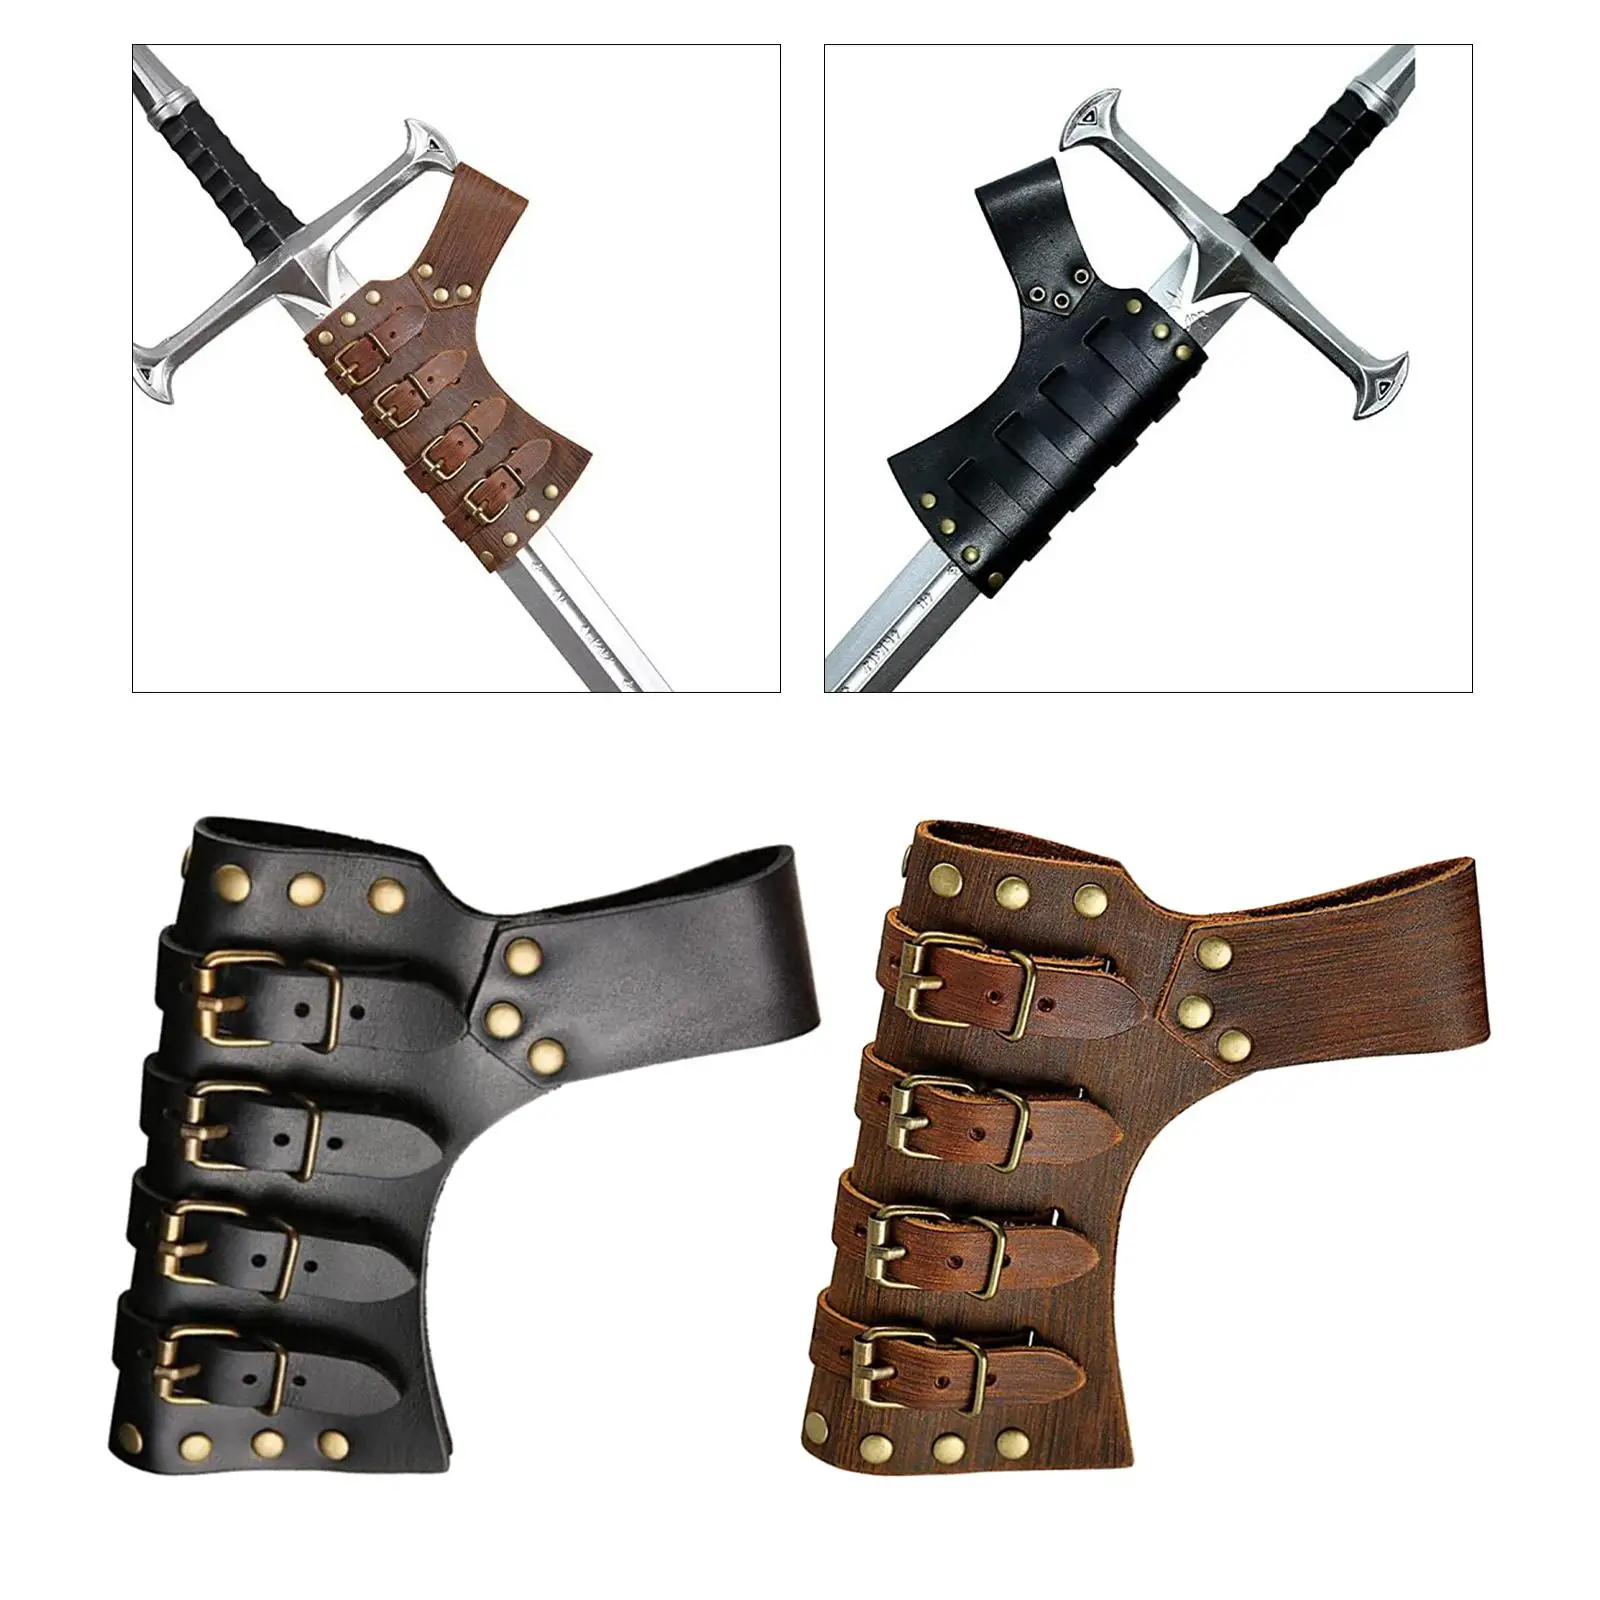 Vintage Style Belt Waist Sheath Cutlass Costume Accessories Medieval Scabbard Holster for Cosplay Party Performance Stage Pirate